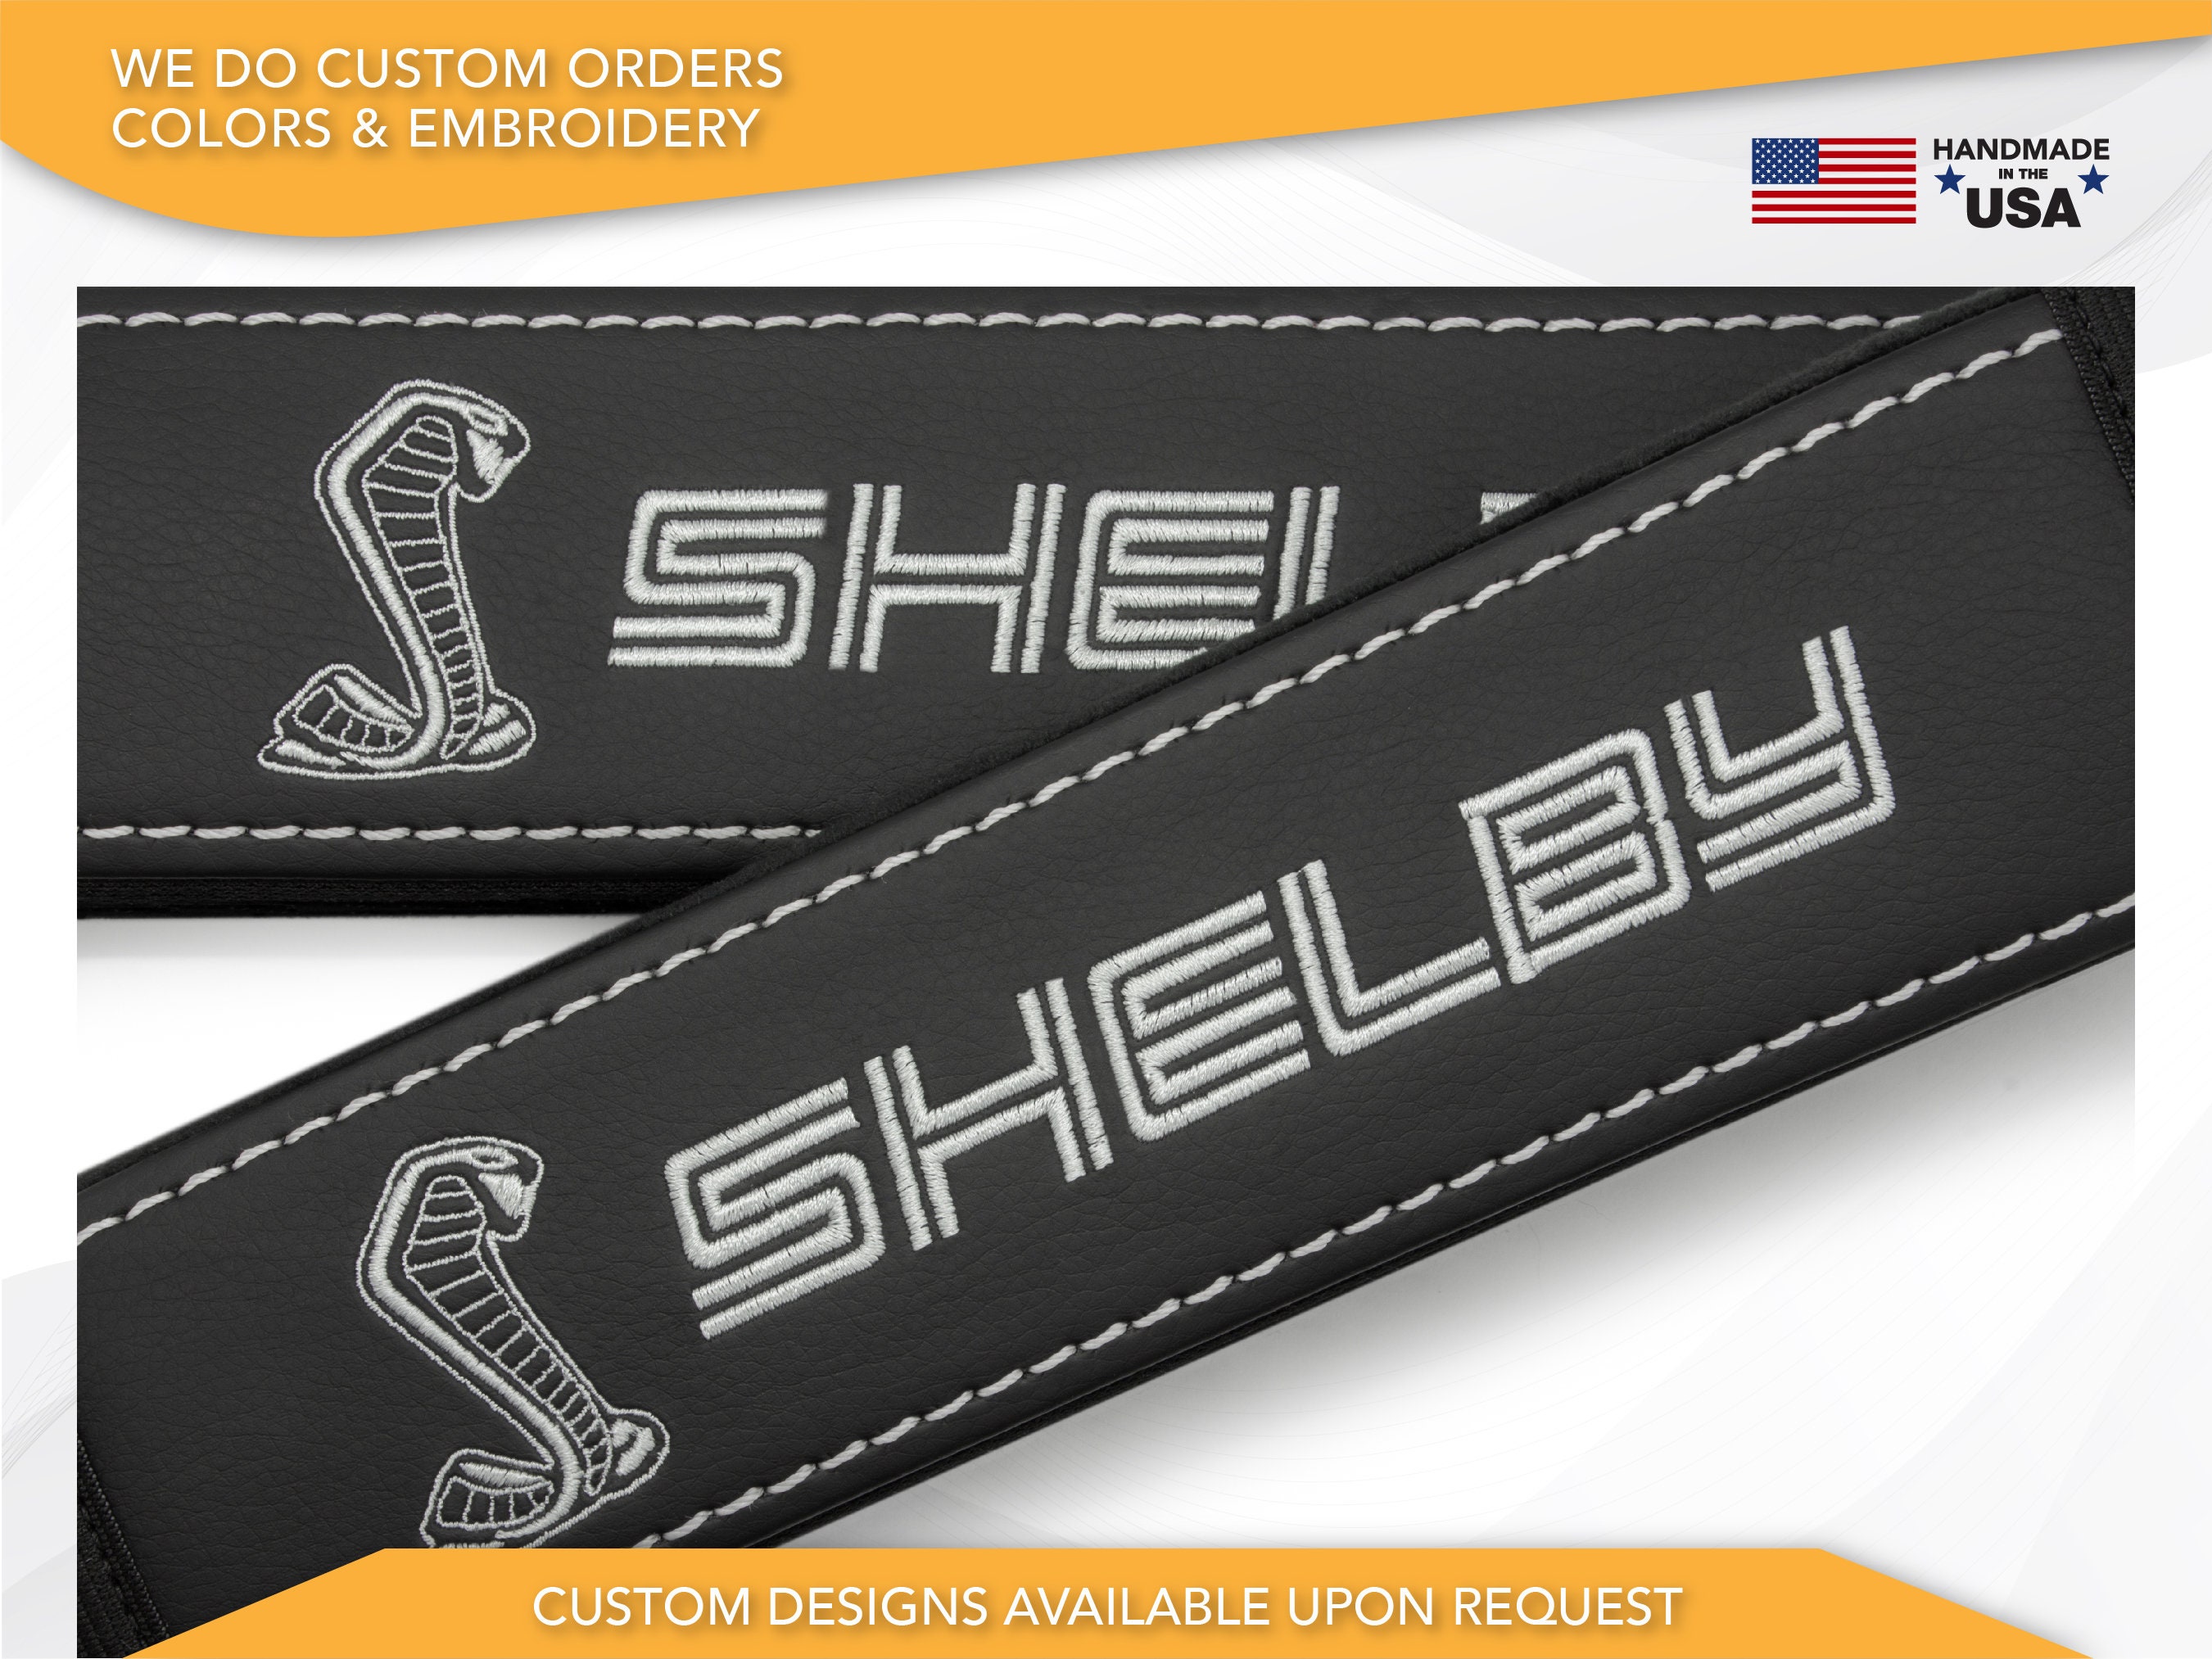 Car Seat Belt Covers Fit Mustang Shelby Cobra Gray Embroidery Vegan Leather  Black Shoulder Pads Handmade Custom Gift Idea set of 2 